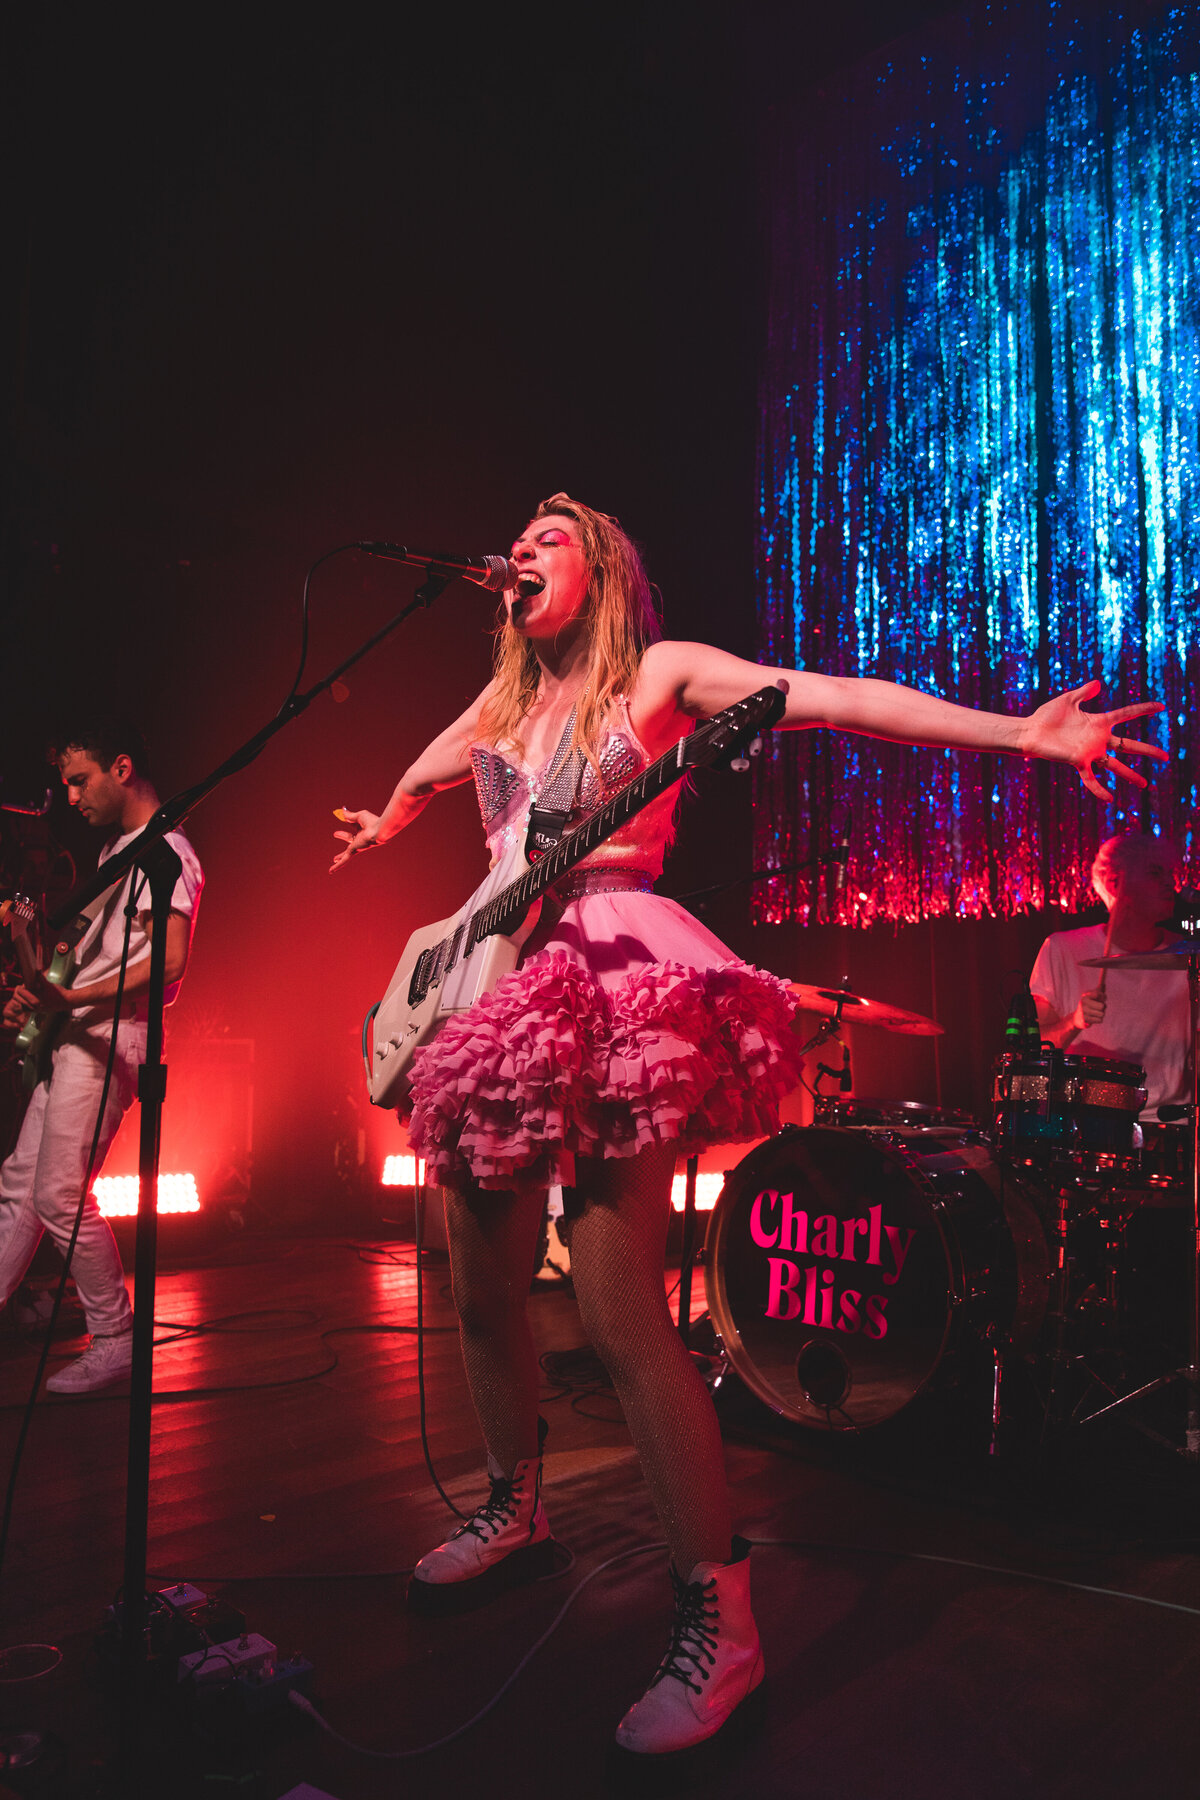 Charly Bliss in Chicago